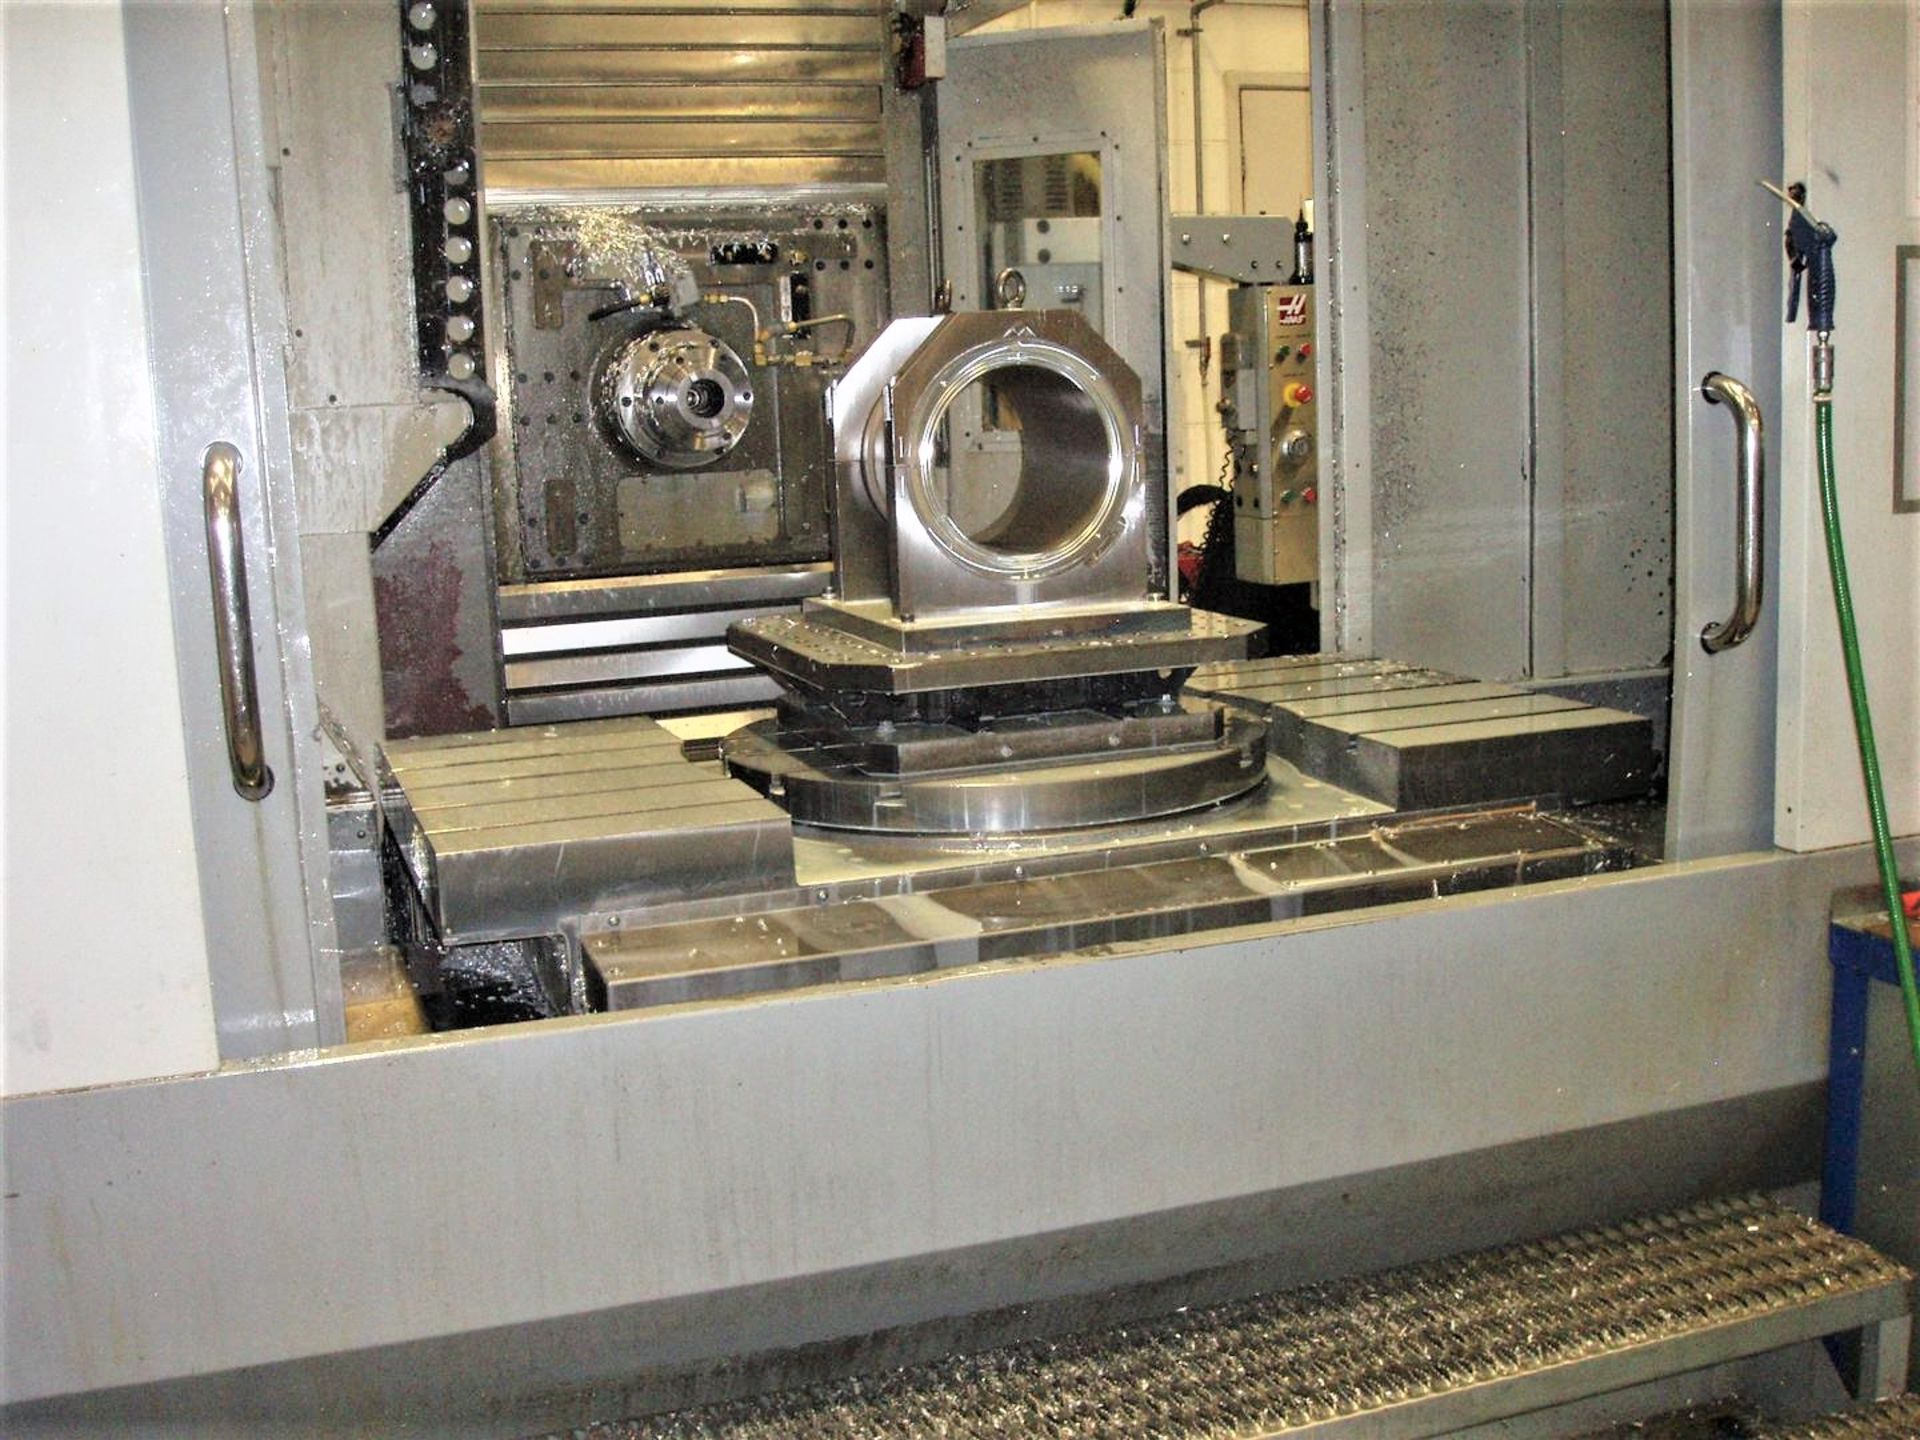 Haas EC-1600YZT CNC 4-Axis Horizontal Machining Center with Extended Z Travel, S/N 2052098, New 2008 - Image 2 of 12